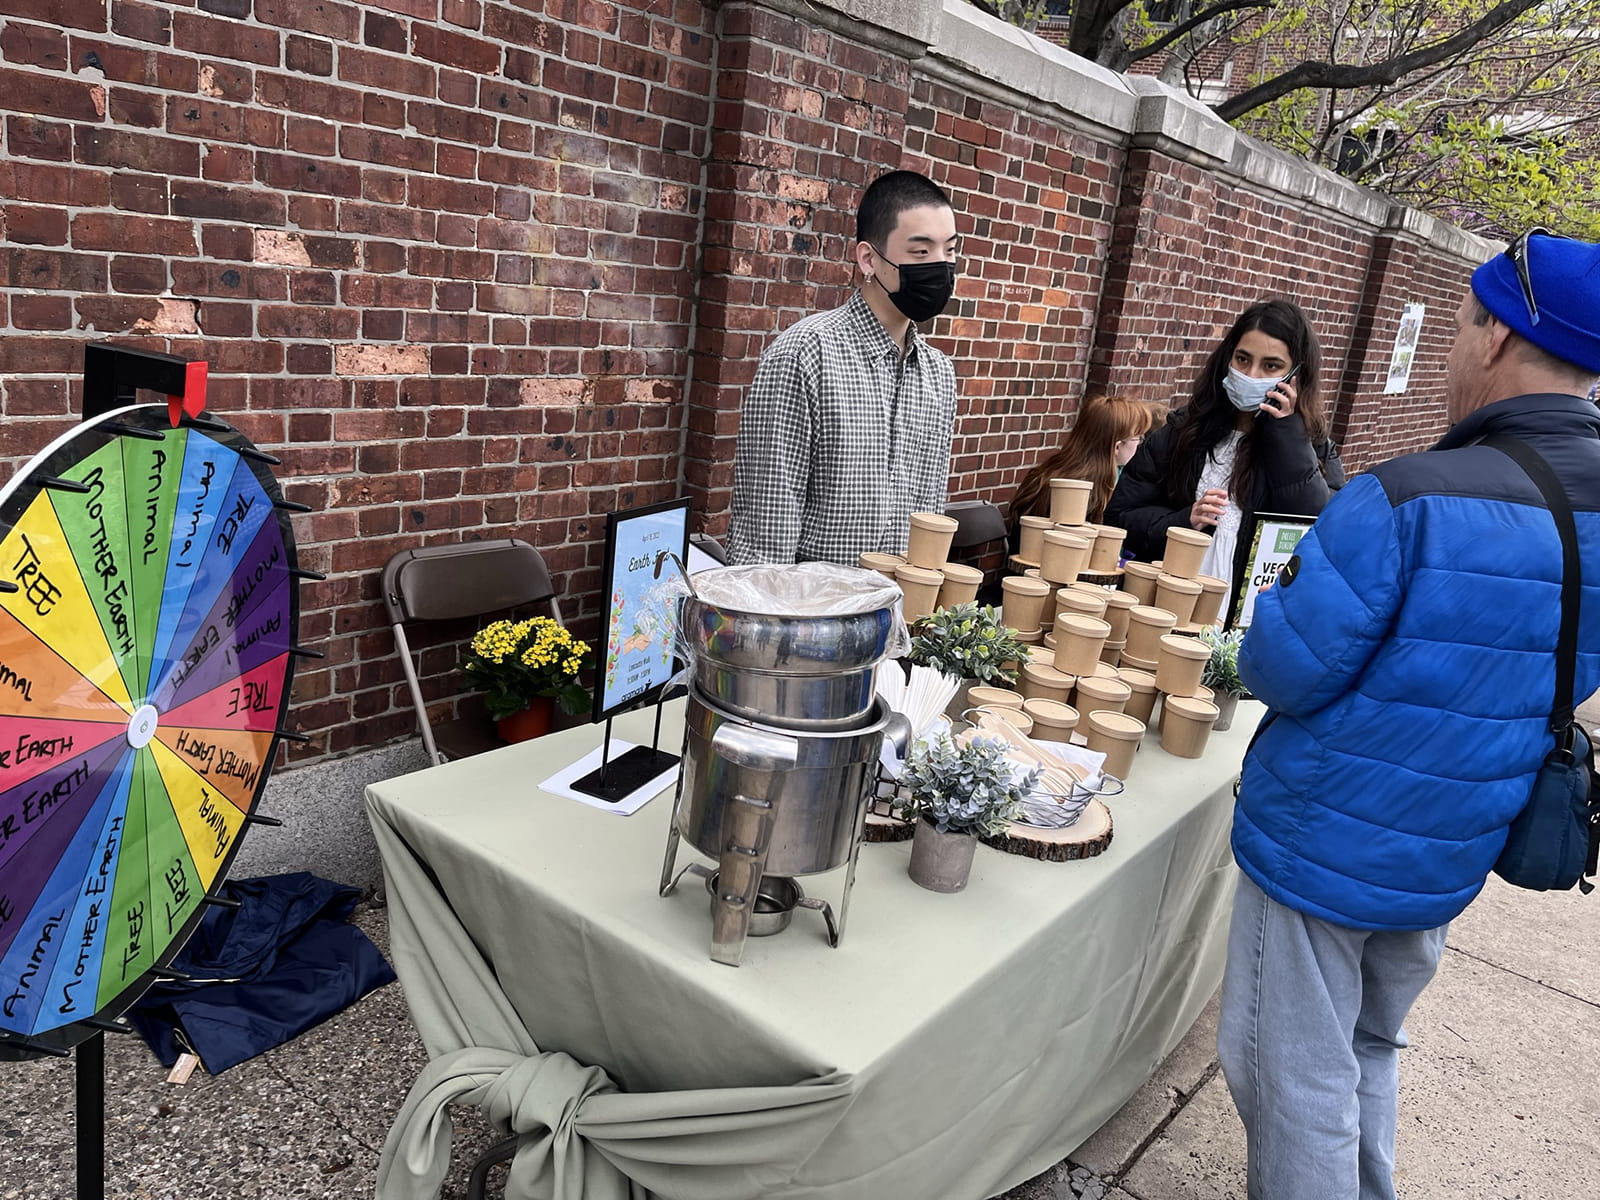 EarthFest participants stand on Lancaster Walk at a table with a metal pot and cardboard takeout containers.